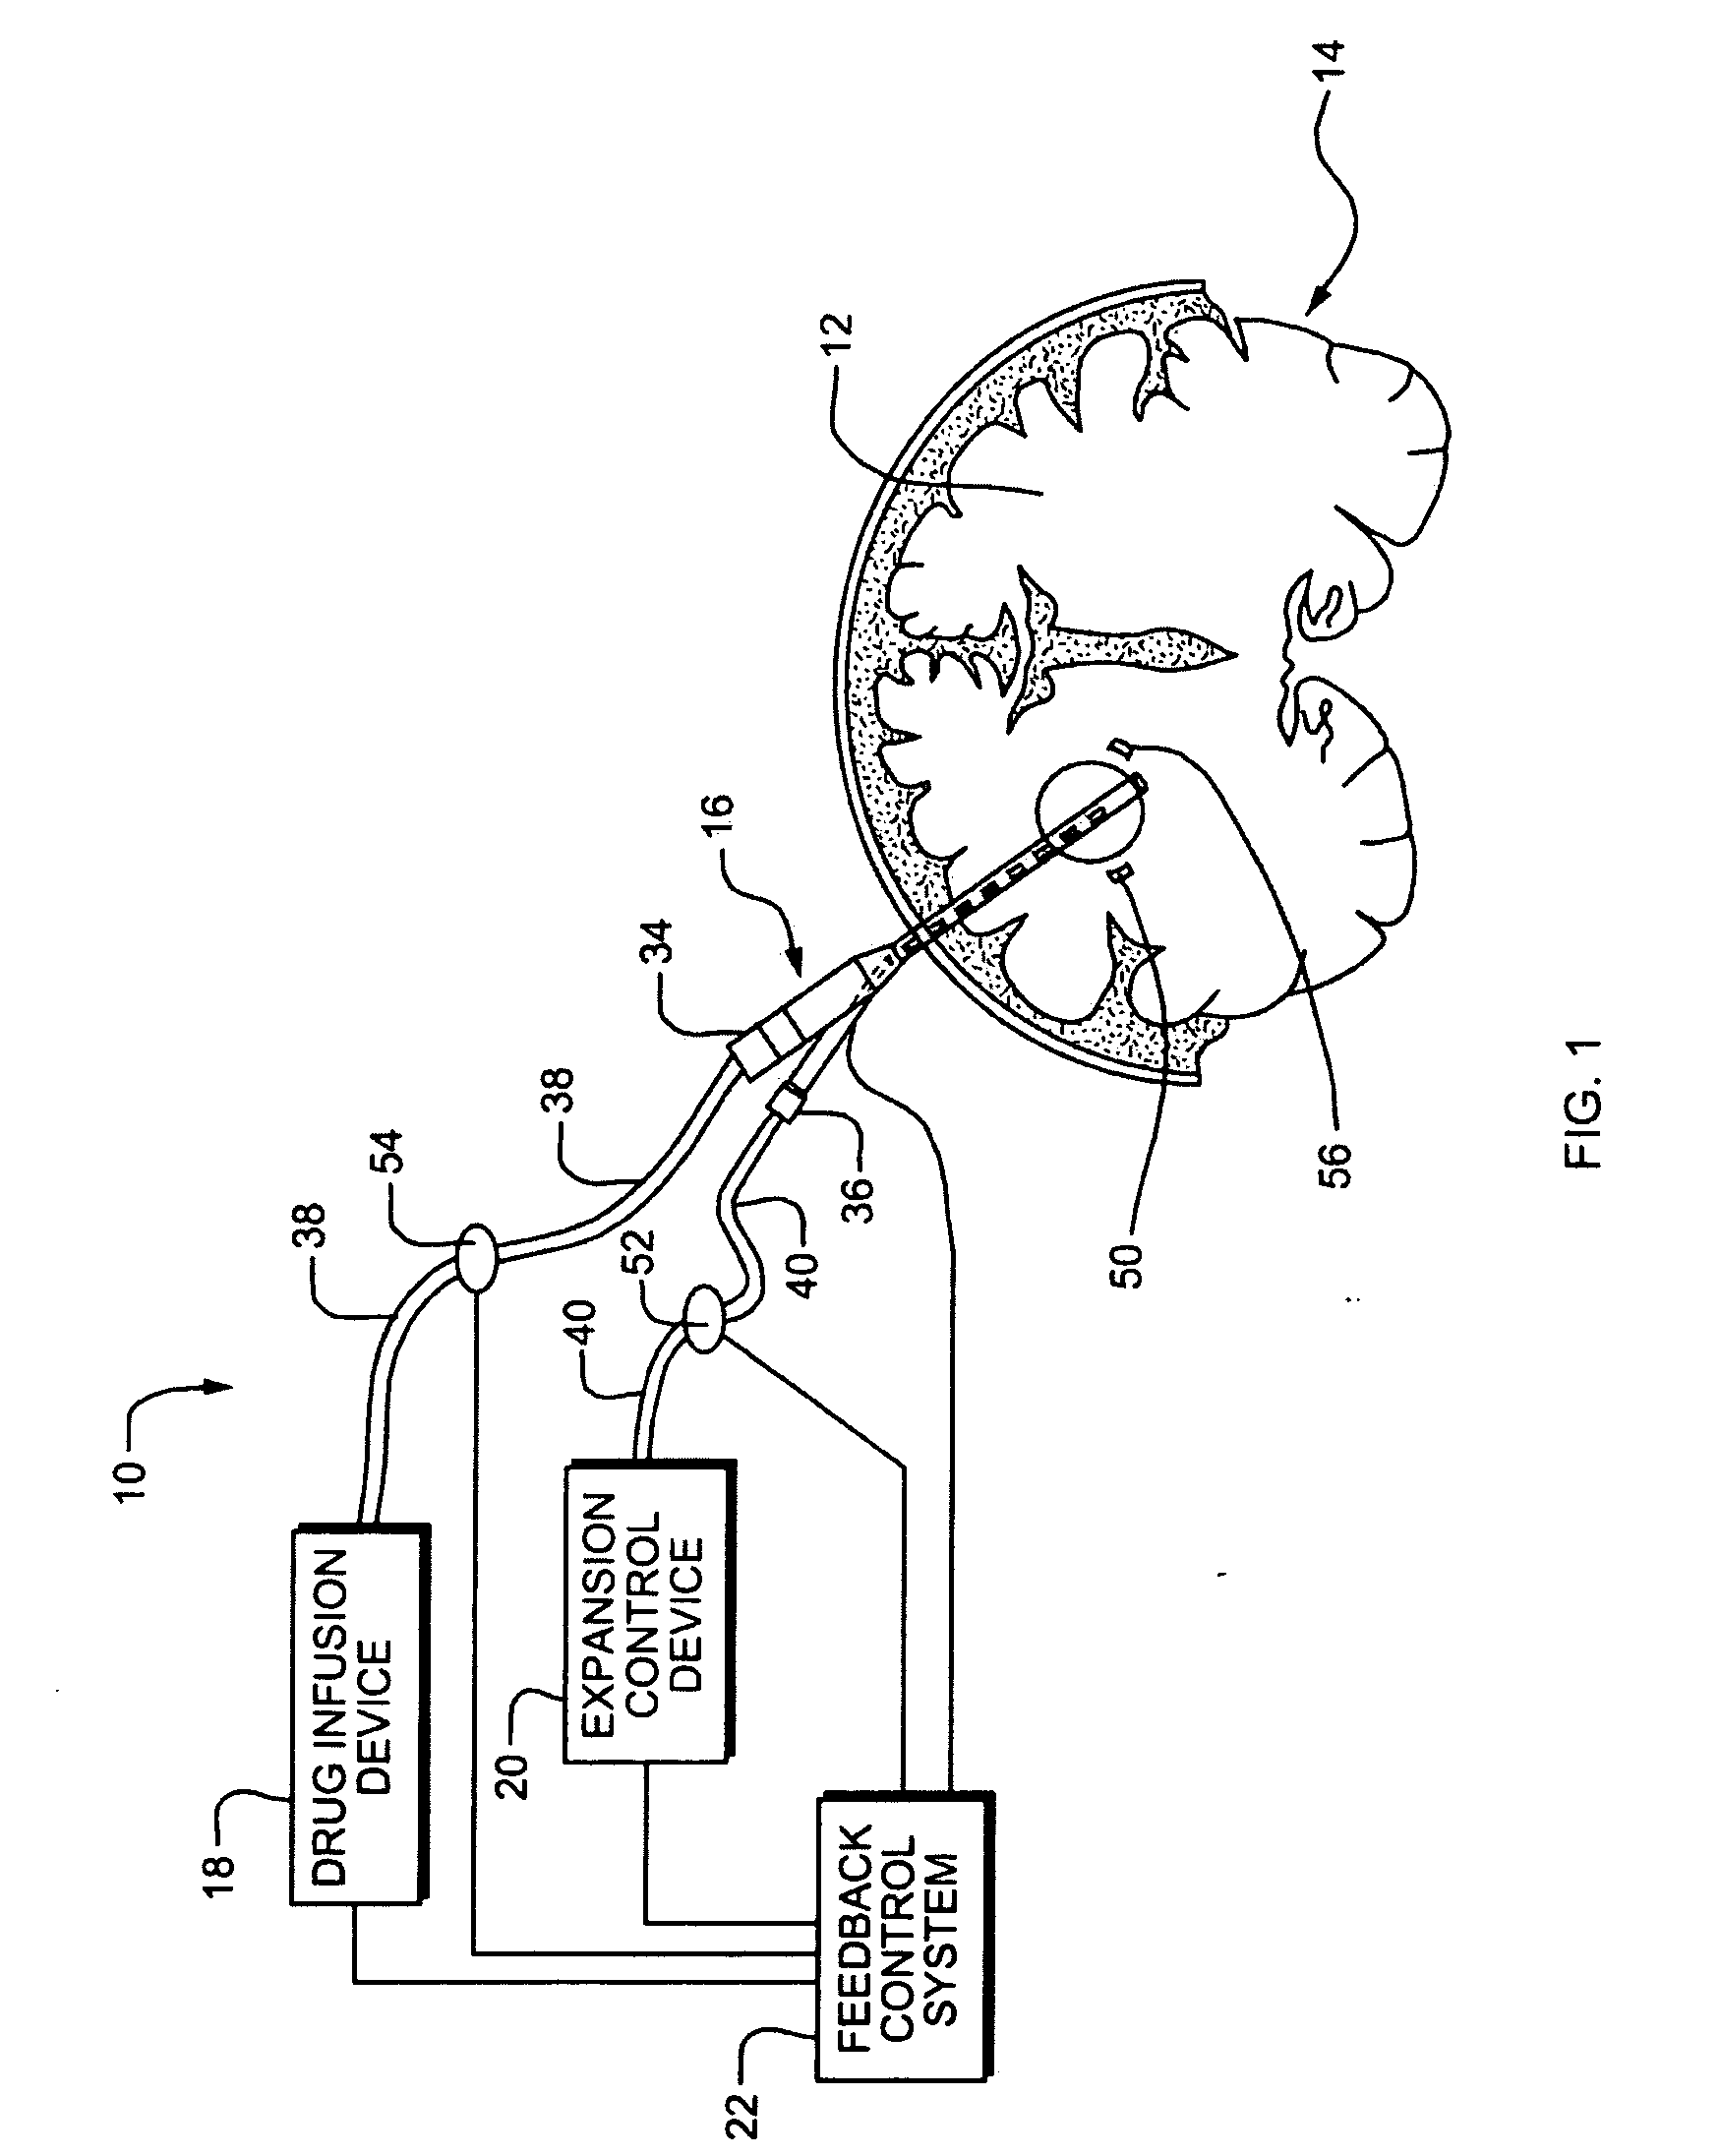 Systems and Methods for Drug Infusion with Feedback Control